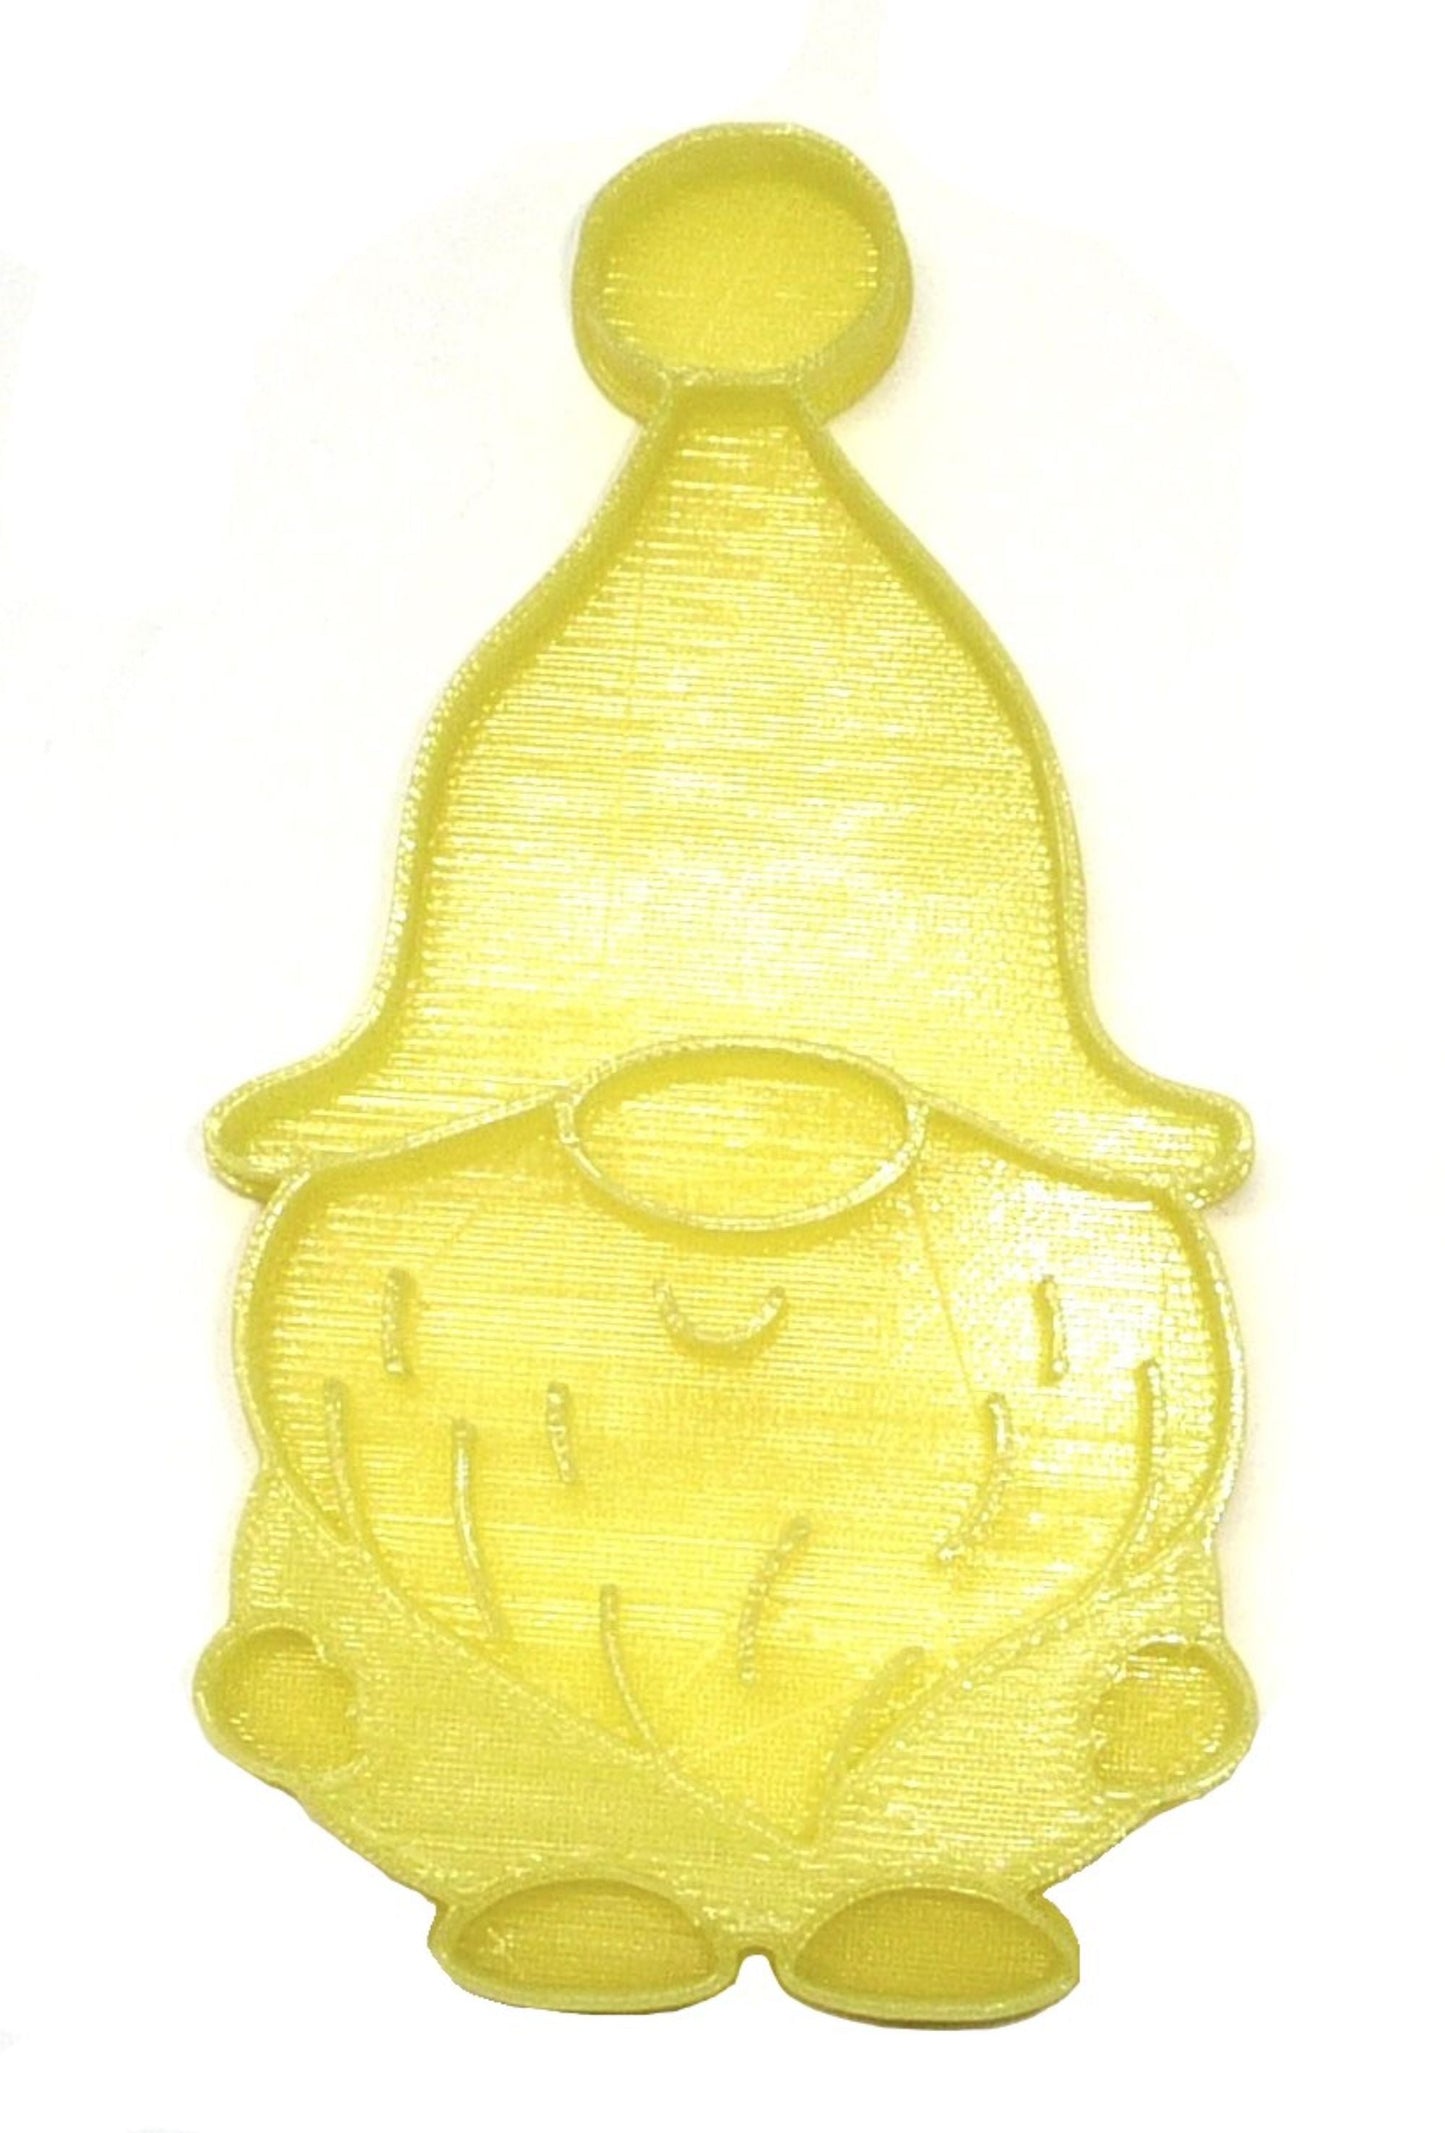 Gnome 4 Dwarf Goblin Mythical Creature Cookie Stamp Embosser USA PR4509